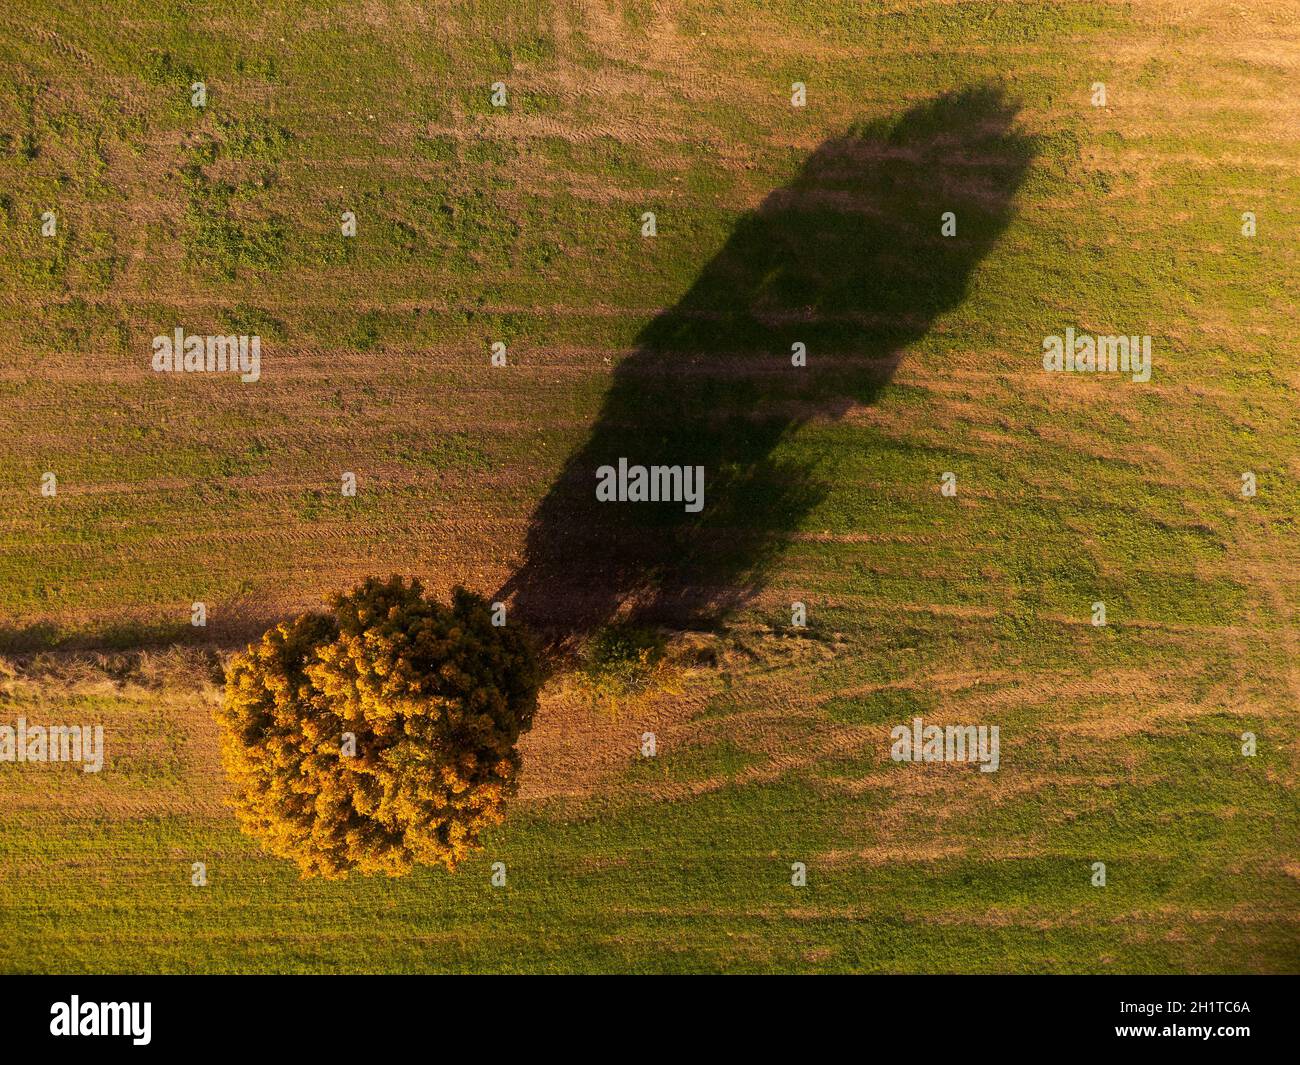 Drone looking down on single tree in cropland casting long shadow with vibrant fall colors in October on sunny day Stock Photo